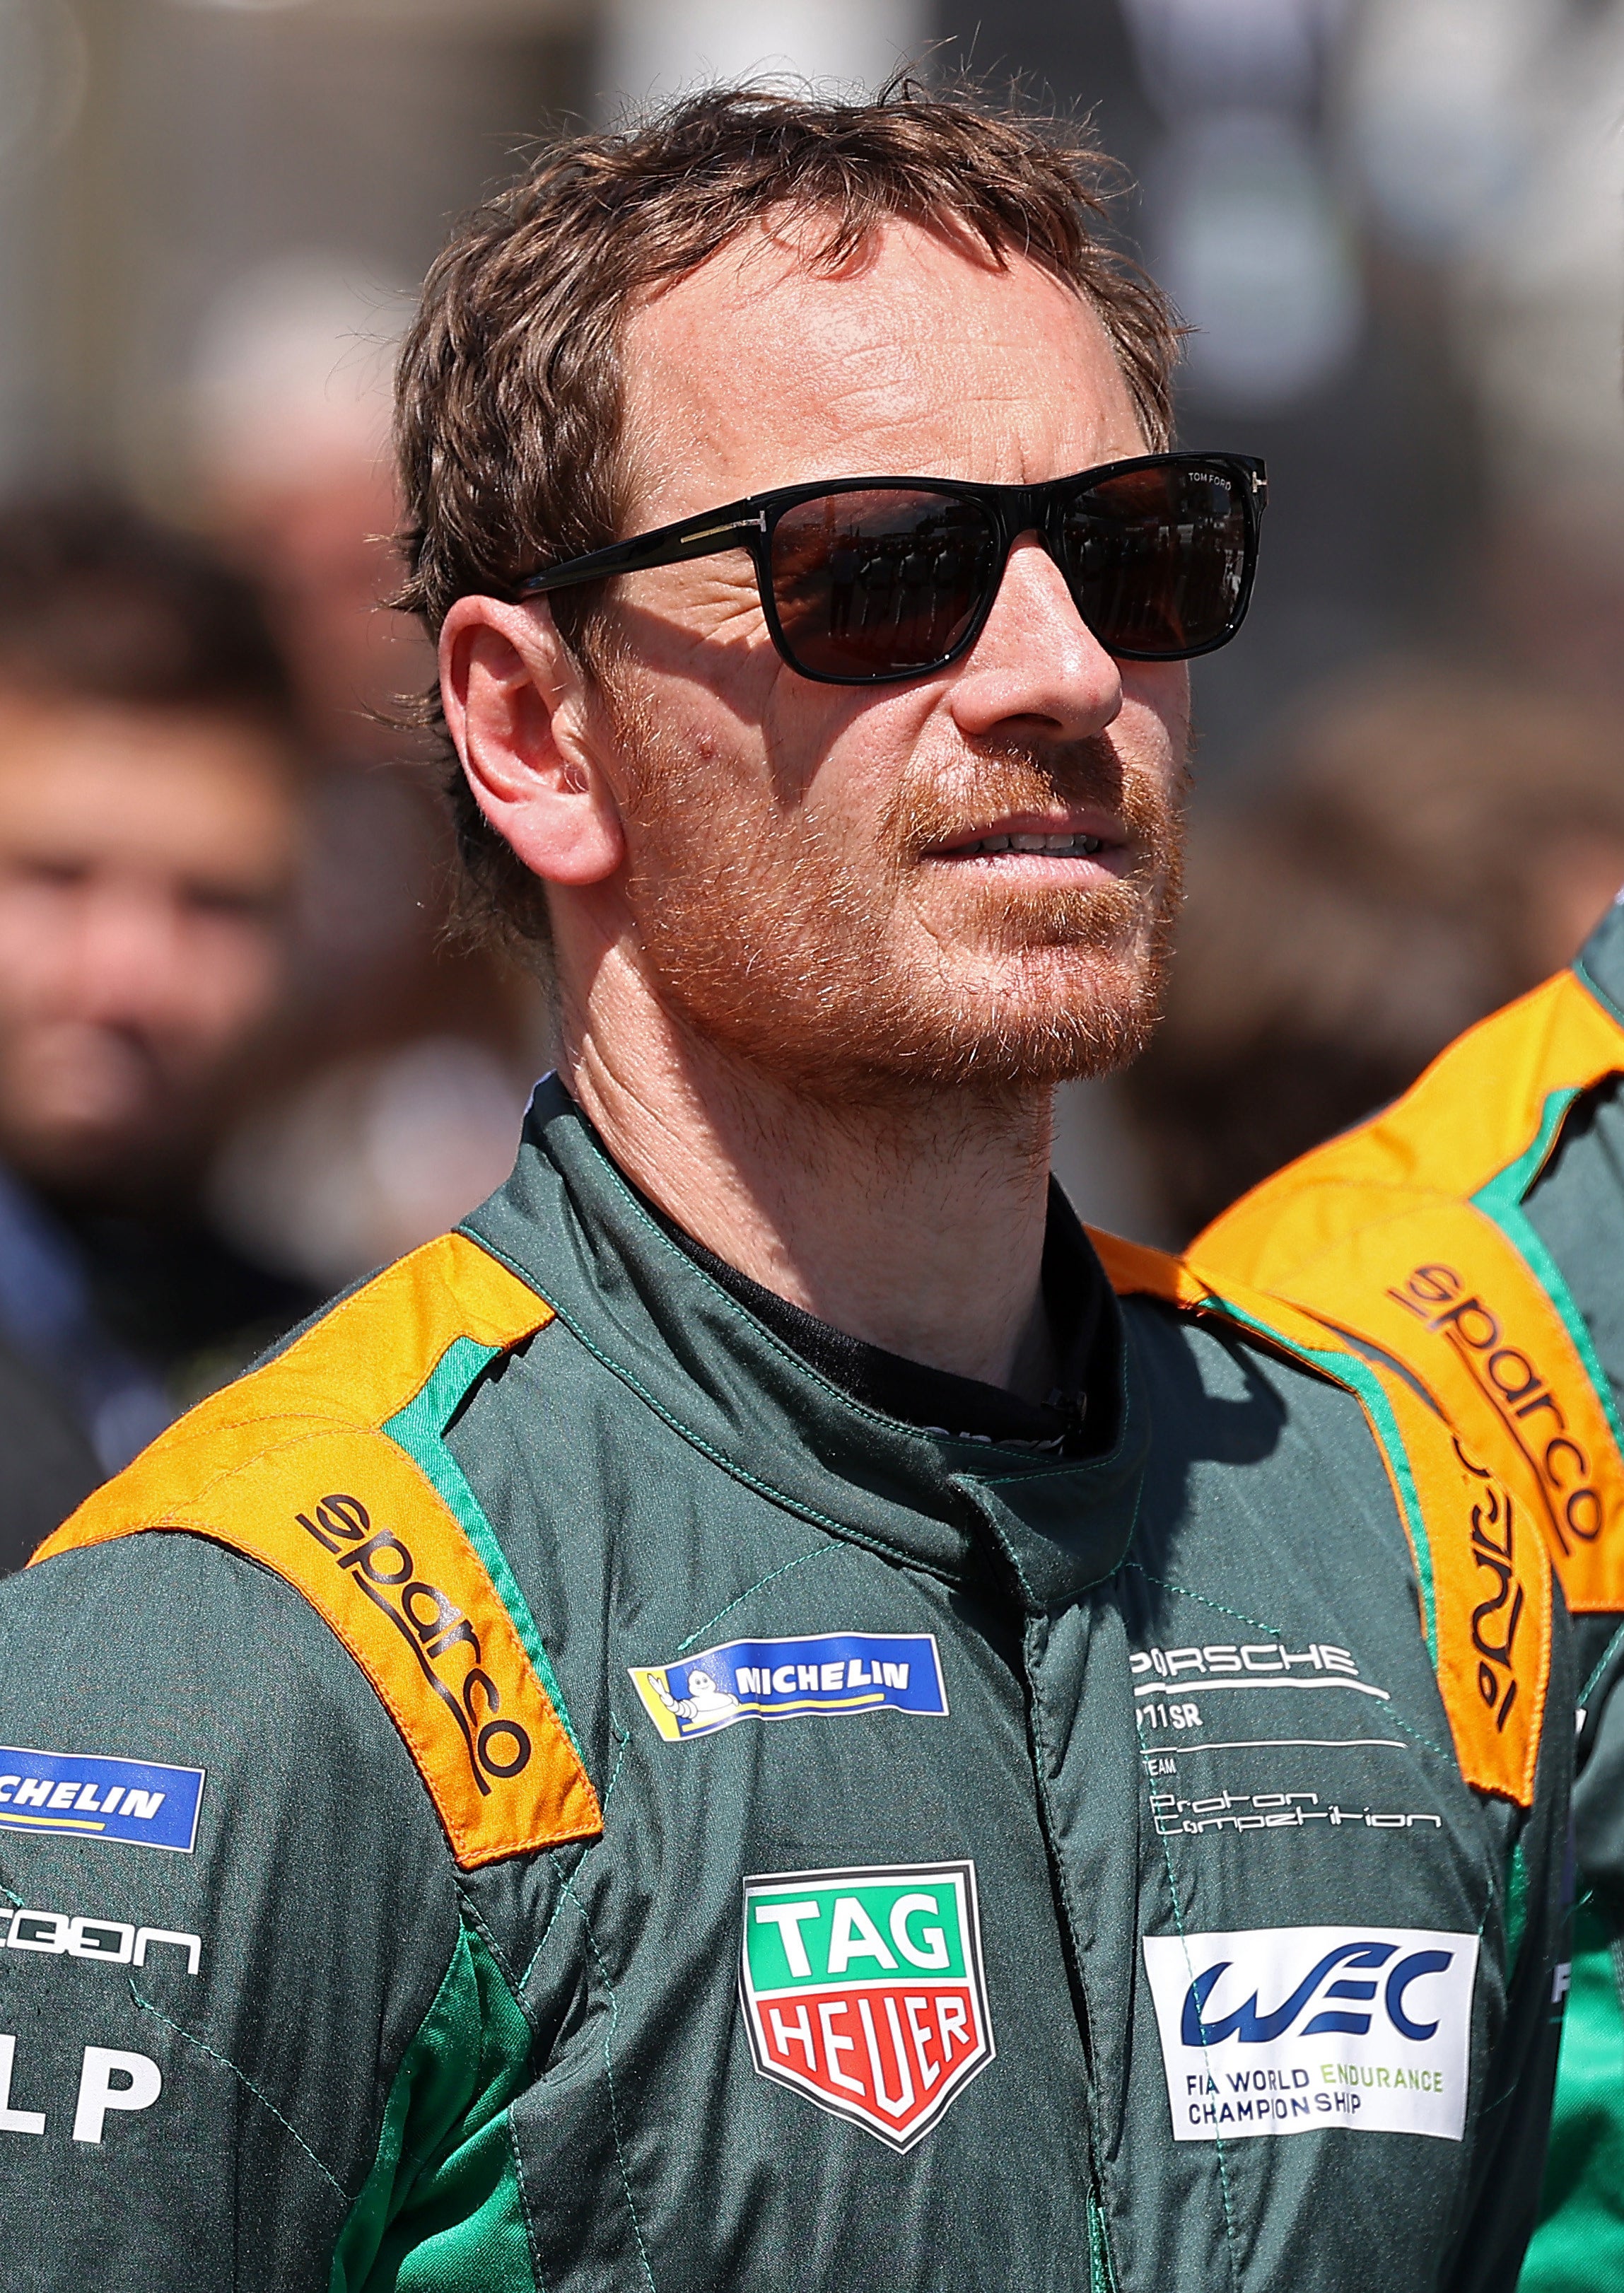 Michael Fassbender at the 24 Hours of Le Mans race